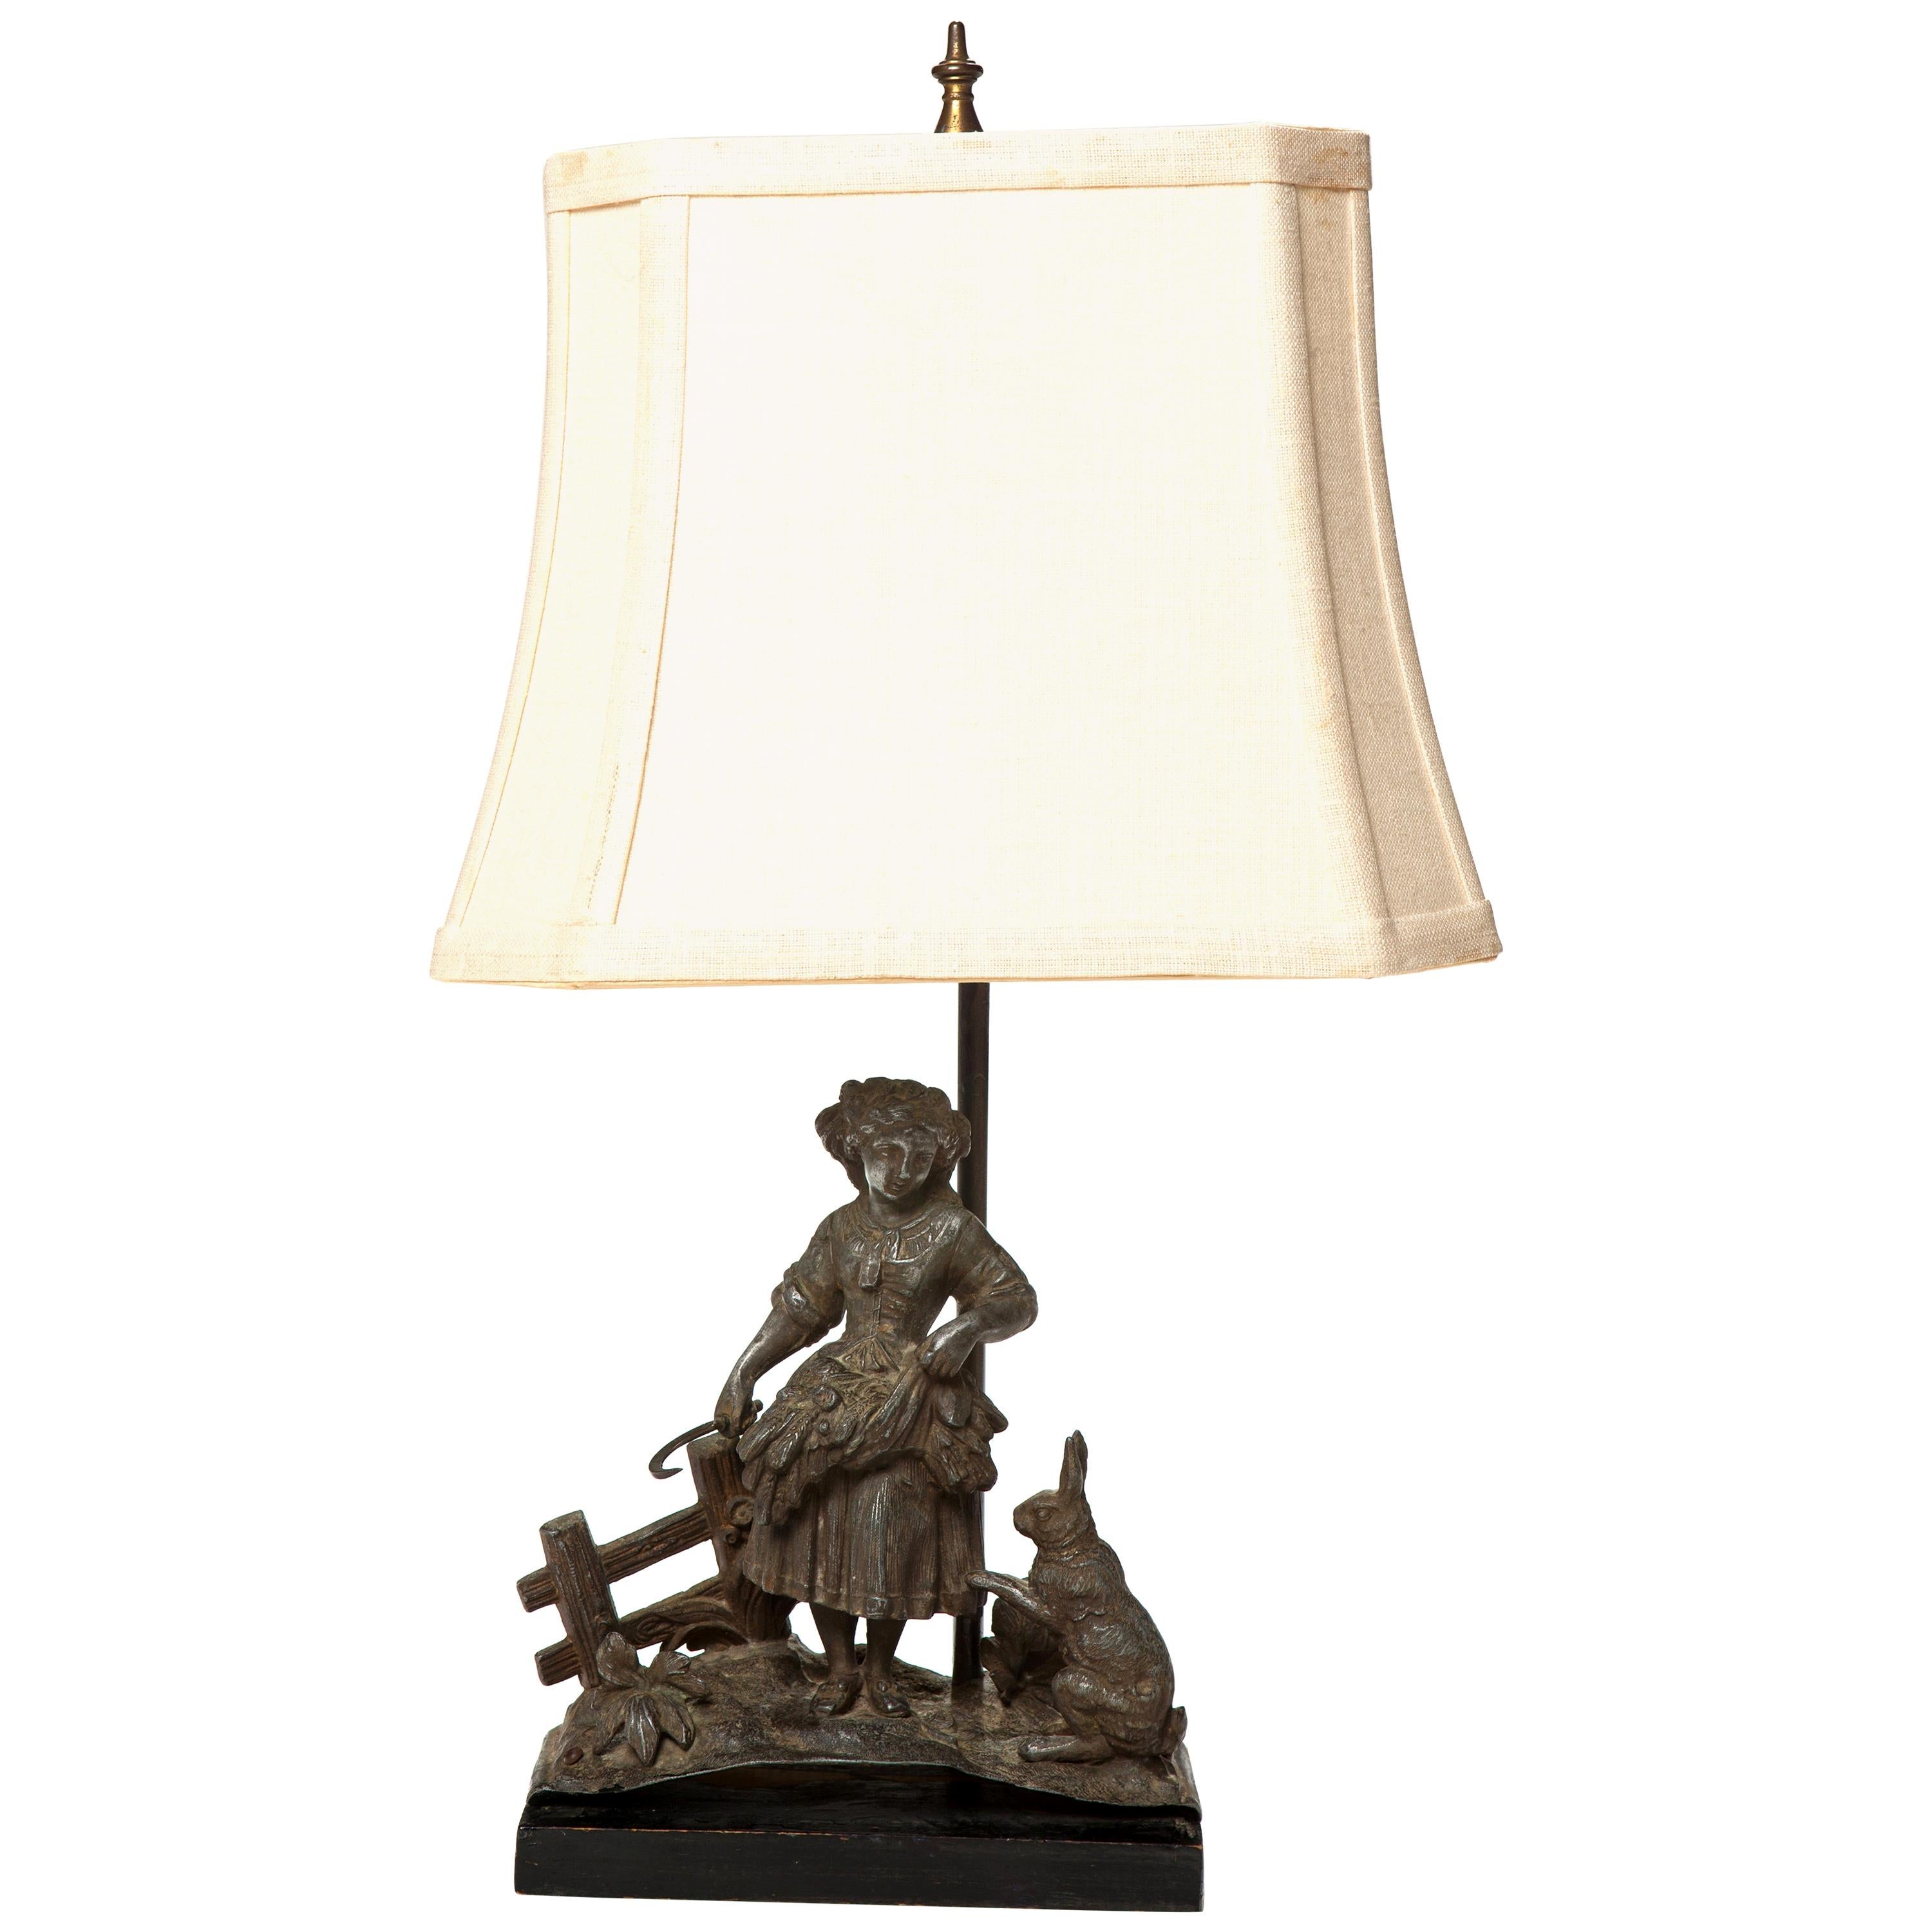 Antique Table Lamp of a Girl and Bunny